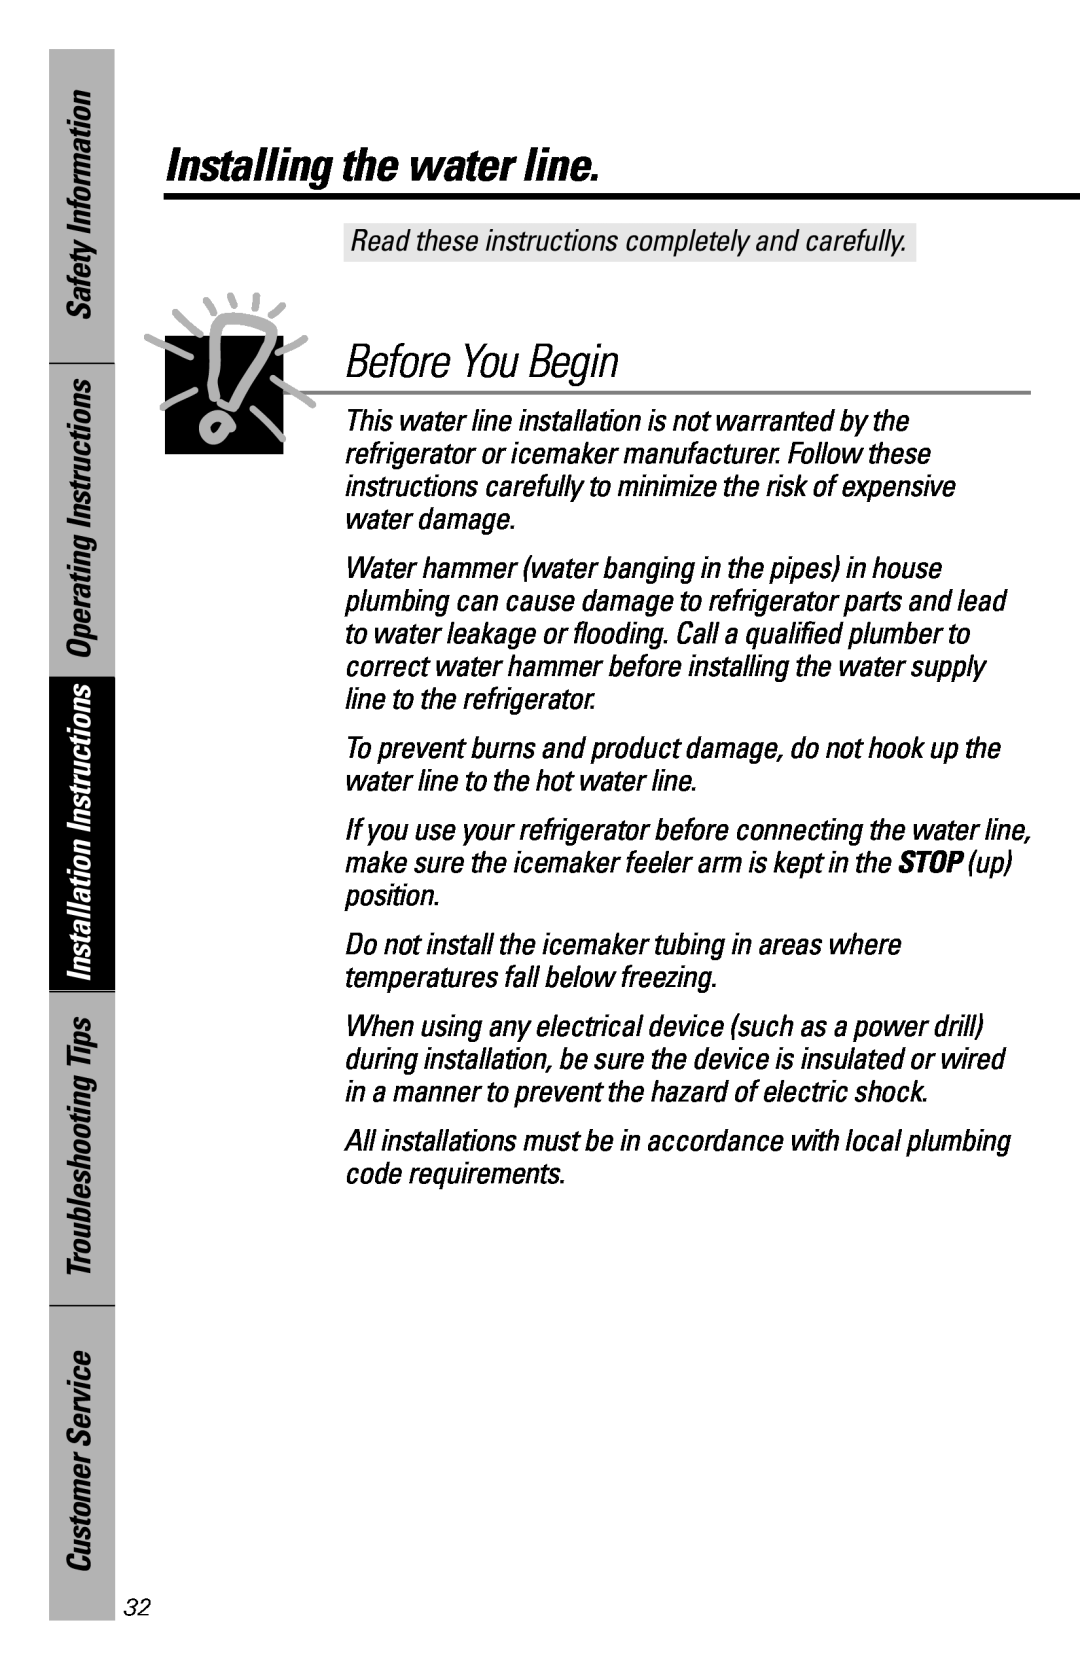 GE 28, 30 owner manual Installing the water line, Before You Begin, Read these instructions completely and carefully 